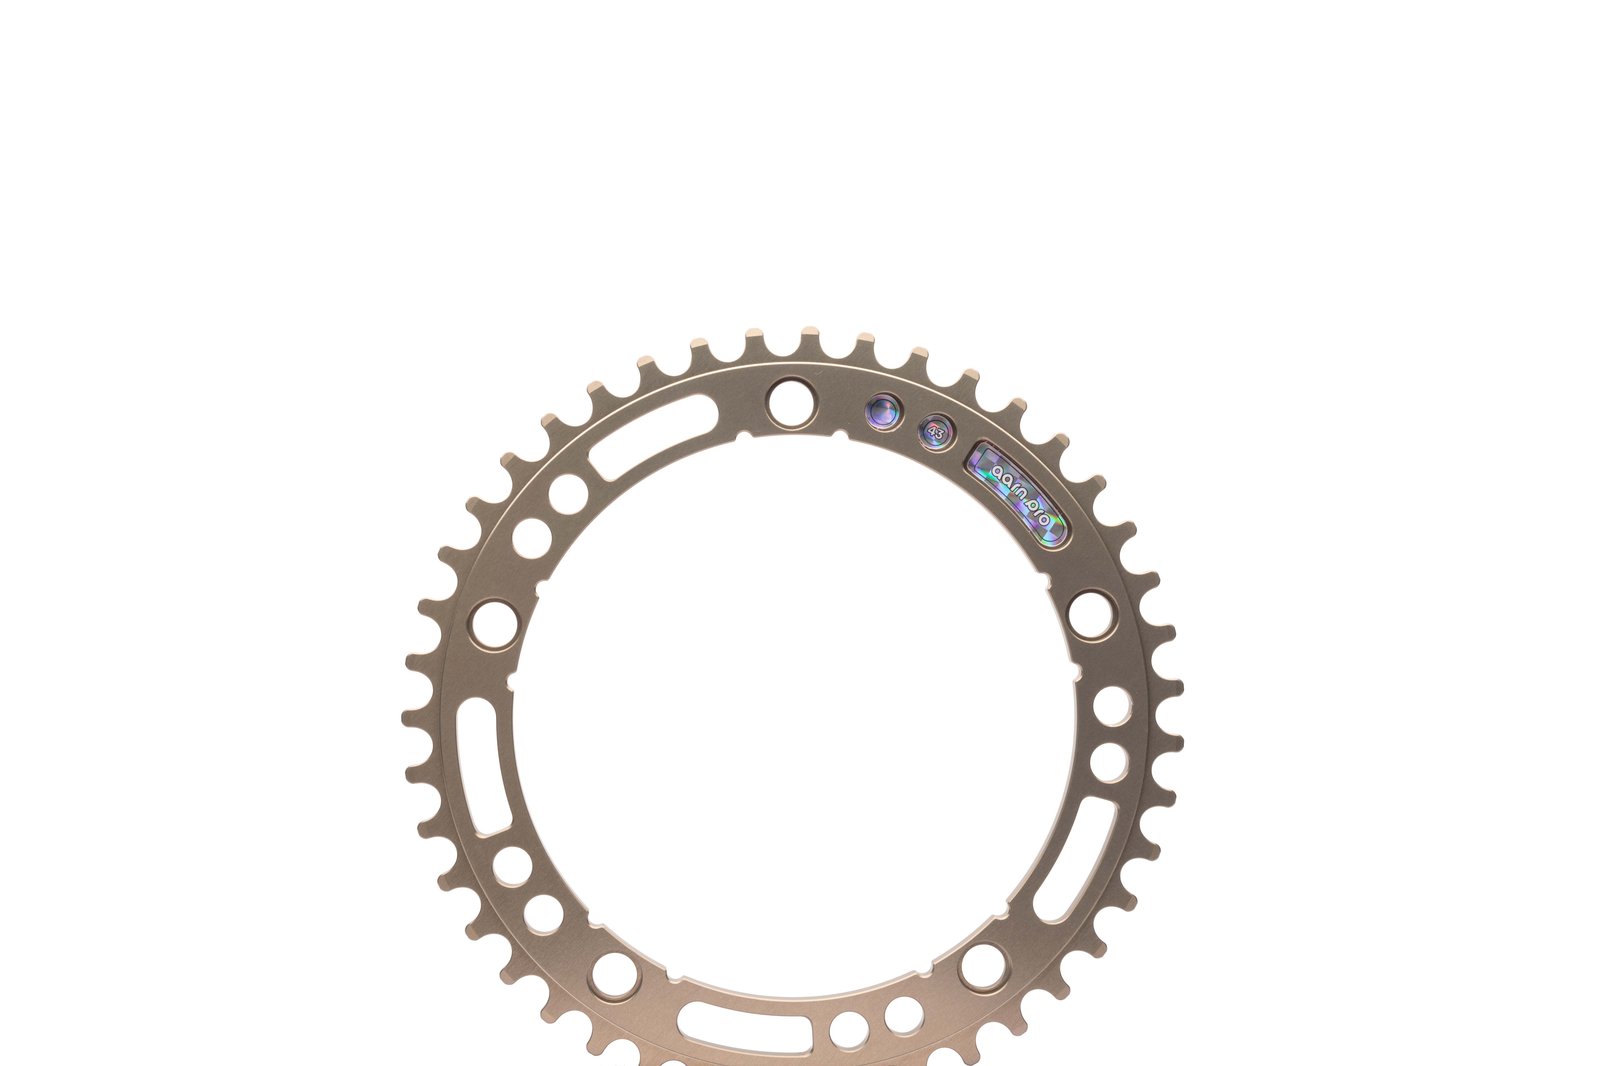 144#43/47/49/51/53/55 AARN PRO Anniversary Track Chainring  (144BCD//43/47/49/51/53/55-Tooth)